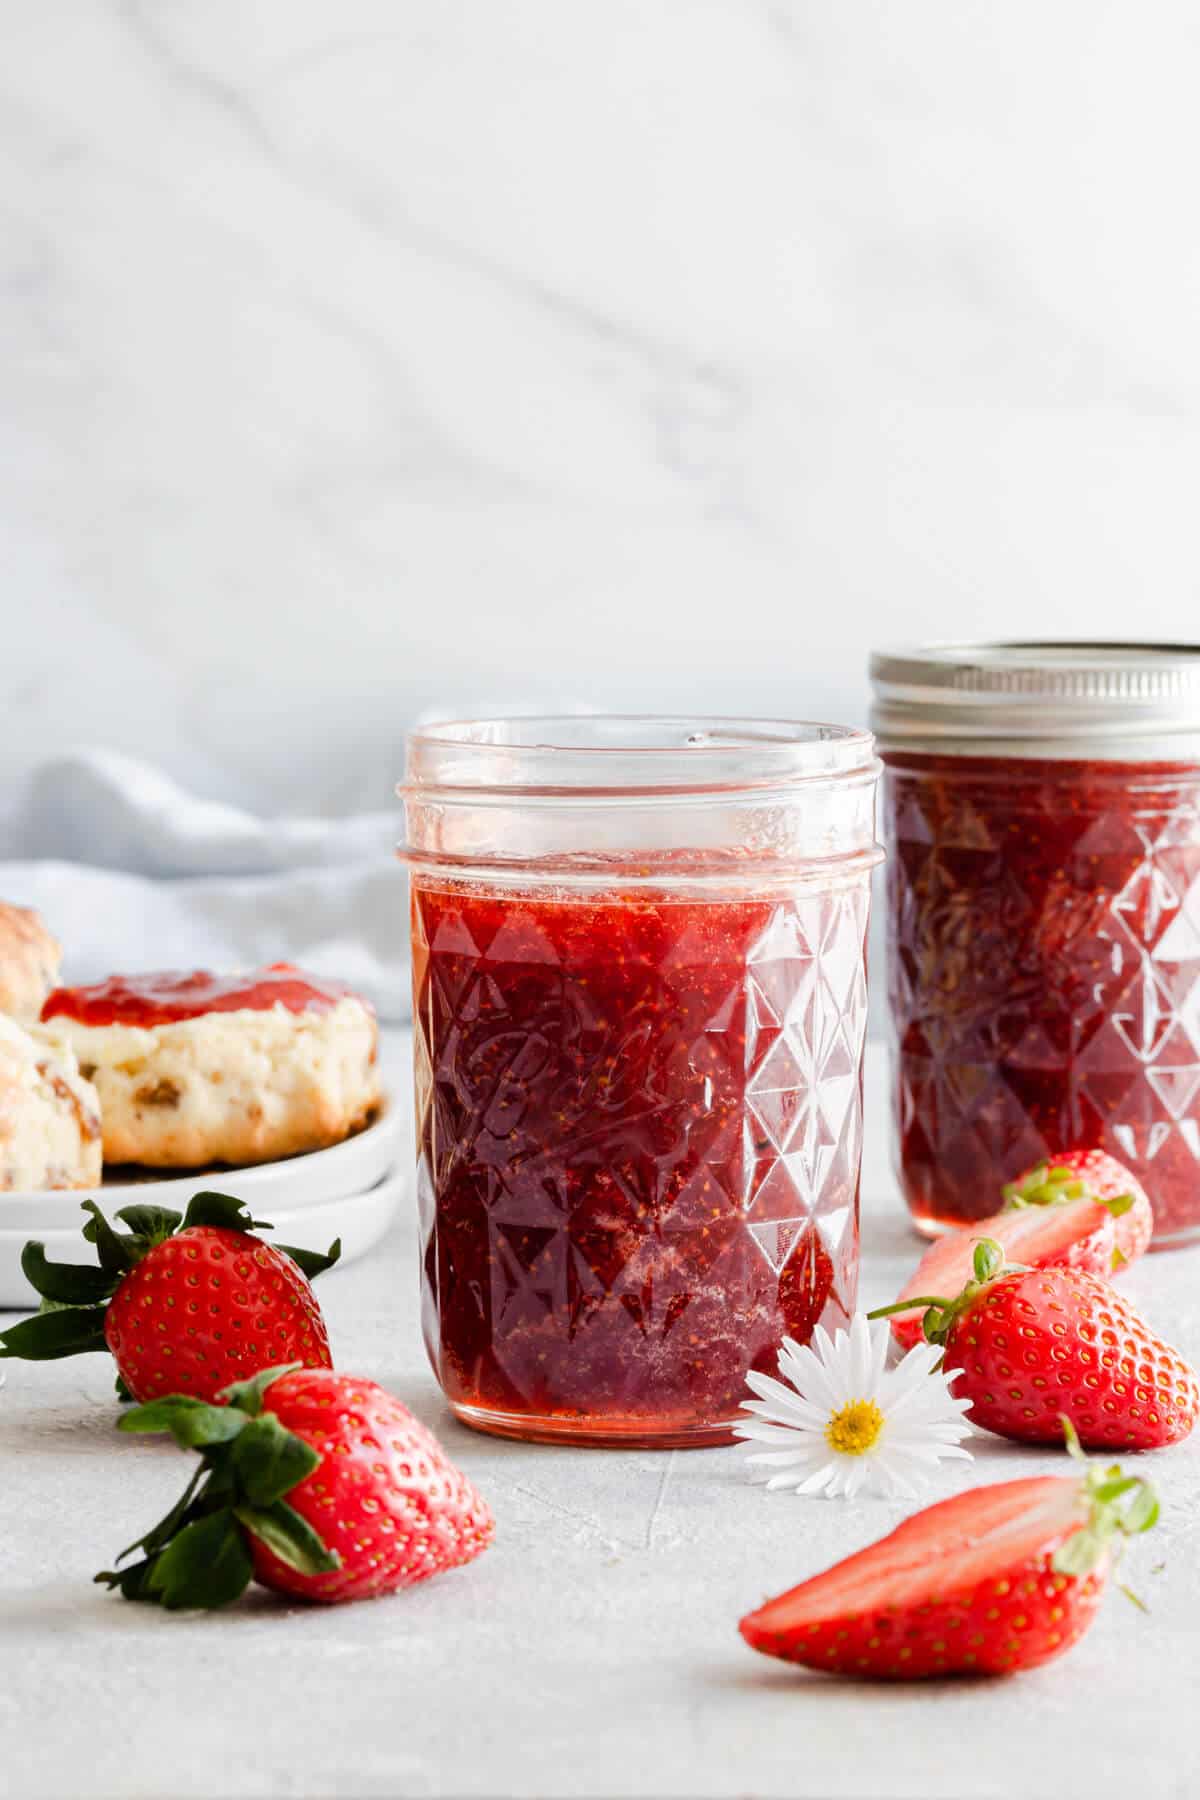 straight ahead shot of glass jar with jam inside and fresh strawberries around it